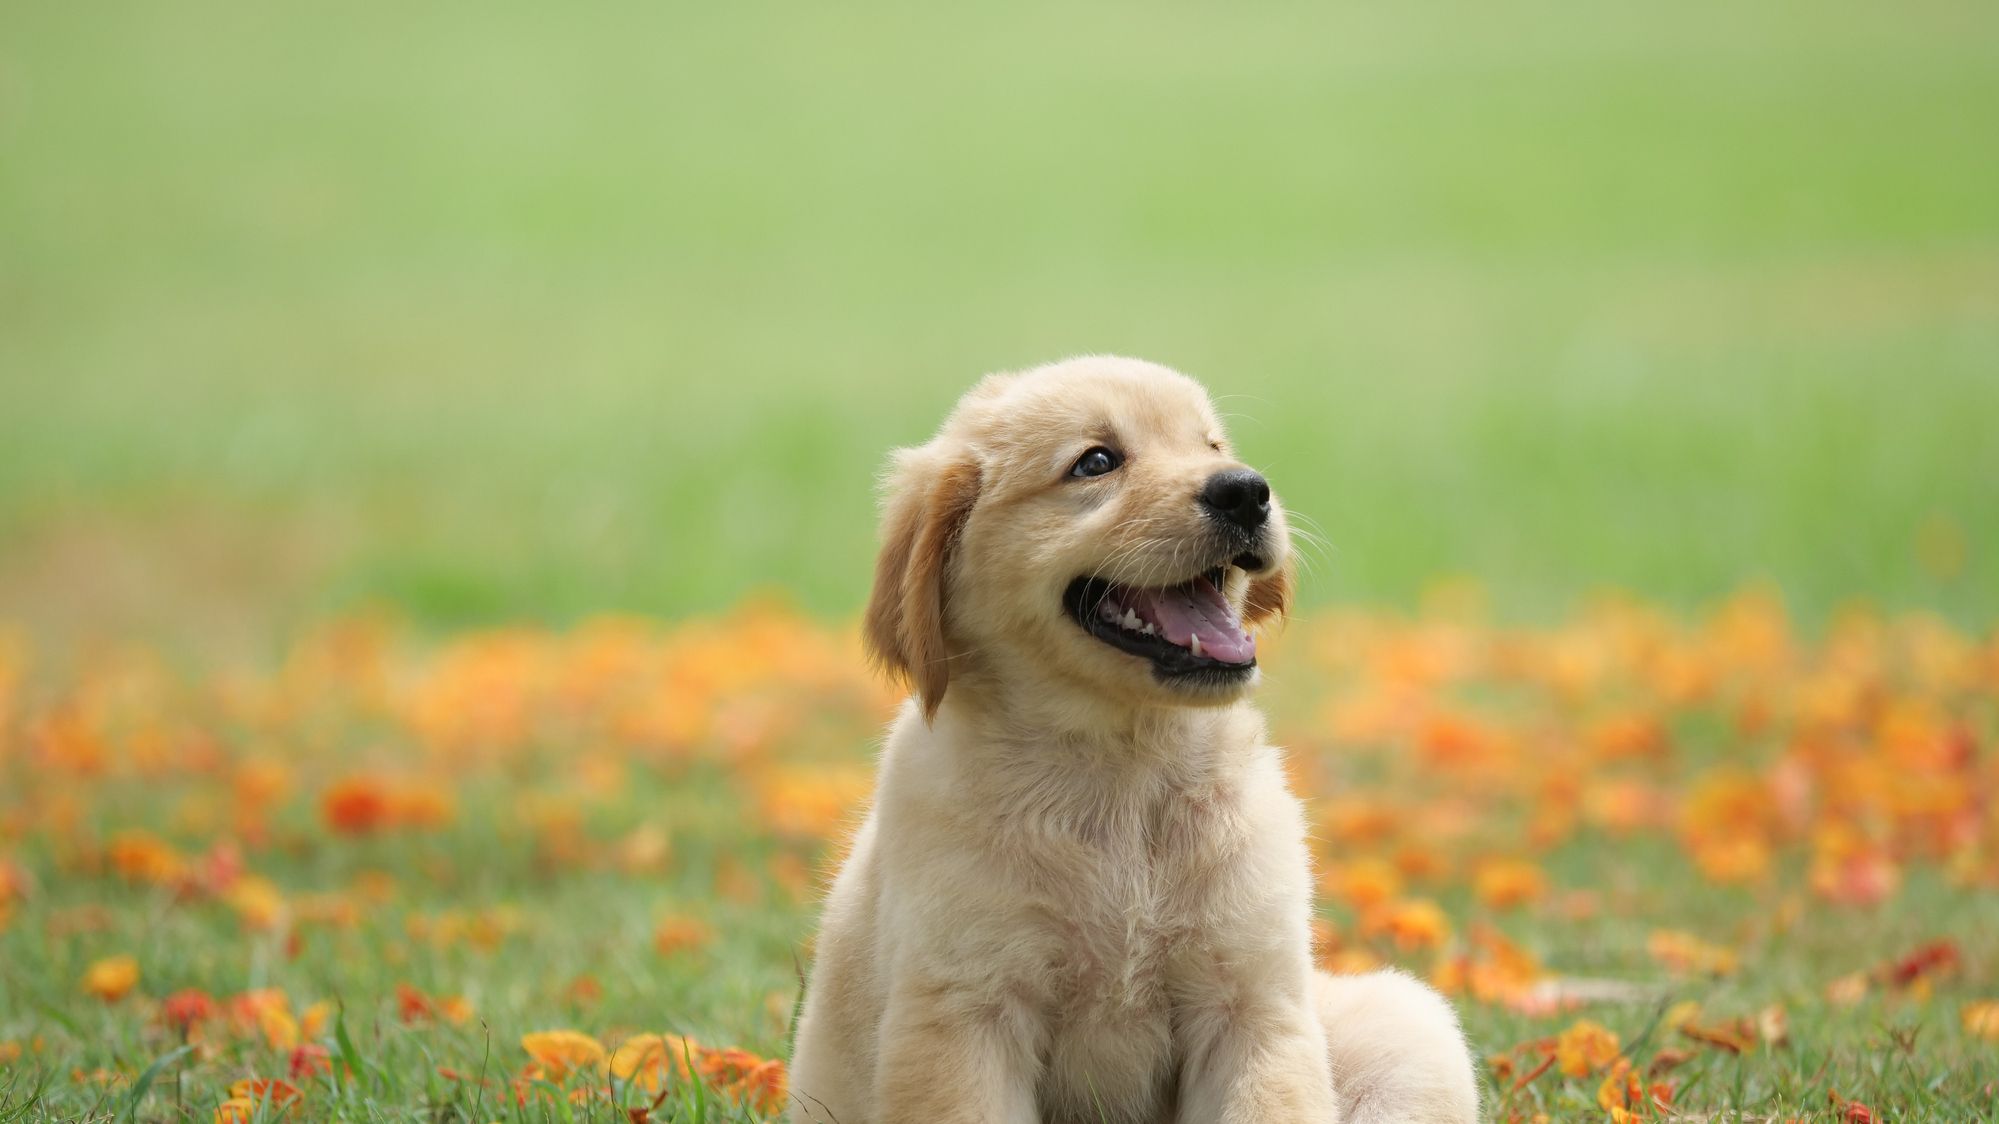 cute dog images for kids